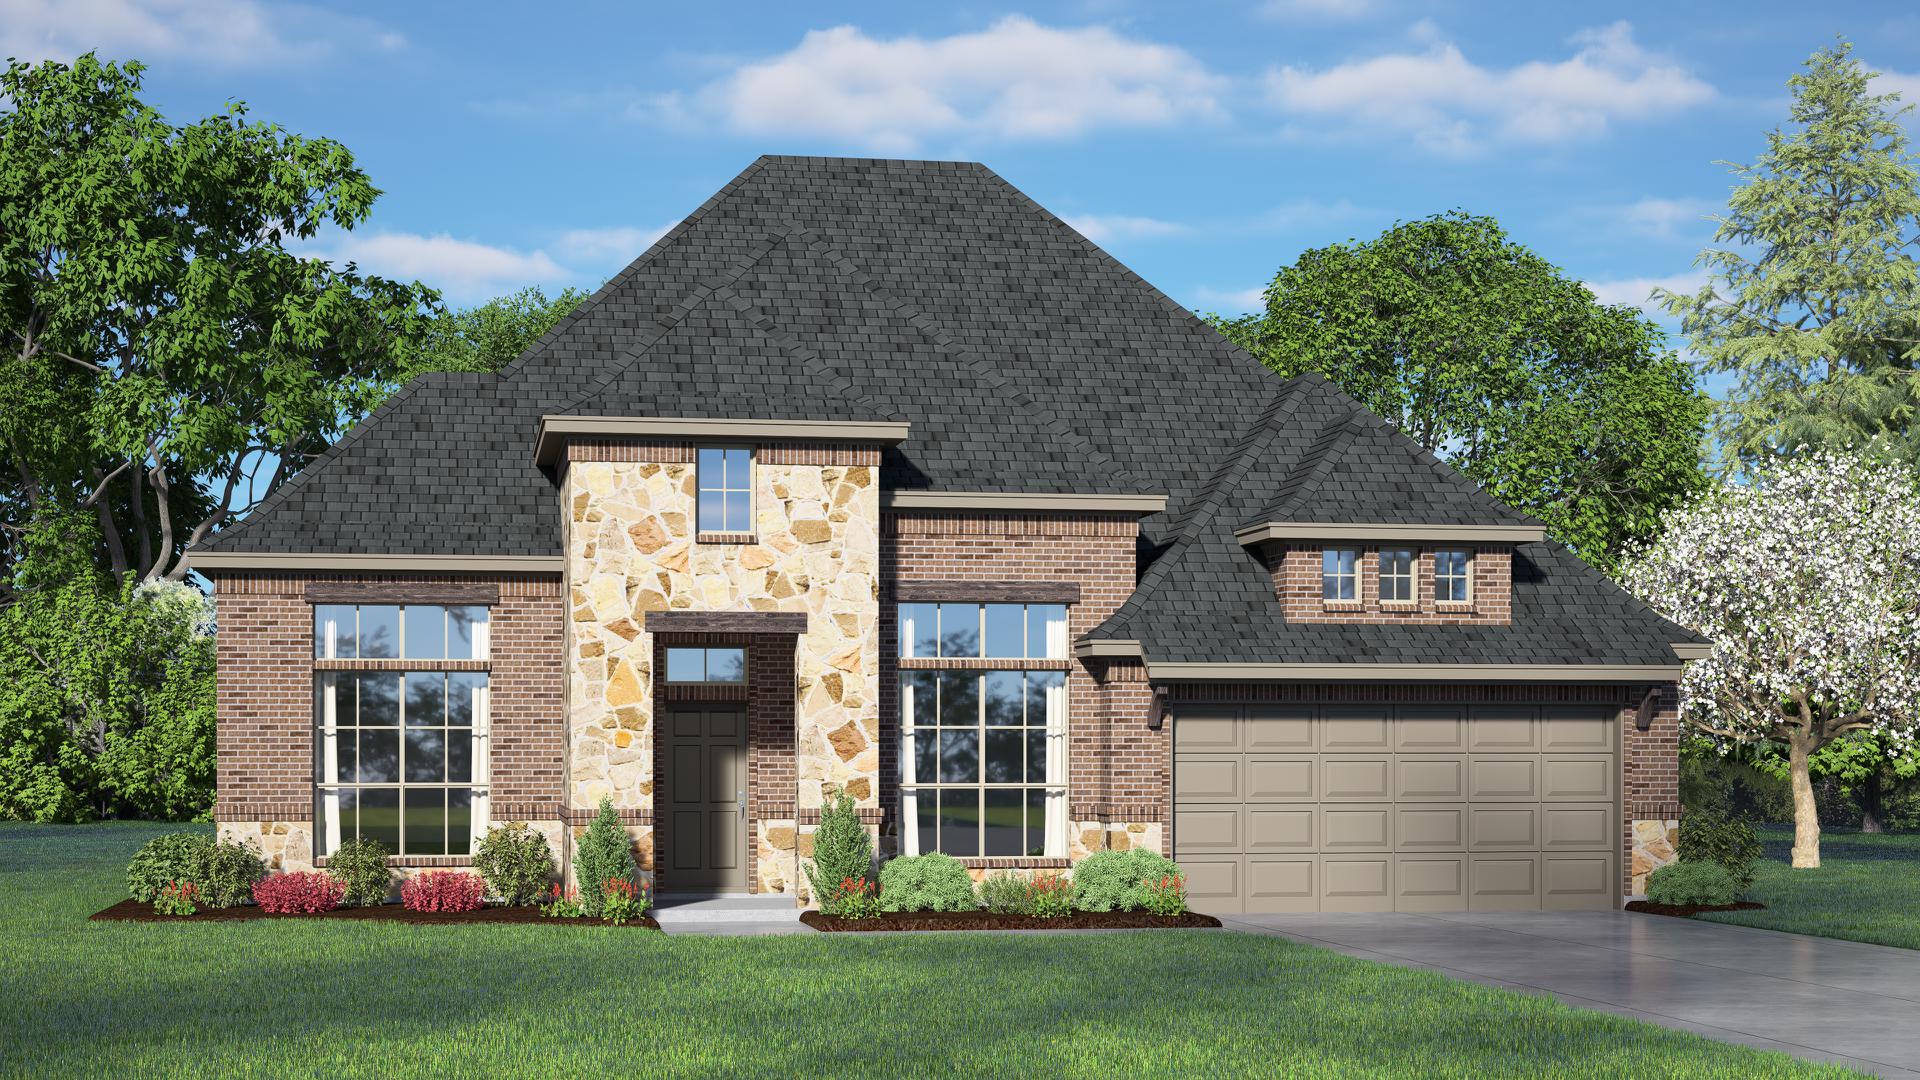 2622 C with Stone. 2,622sf New Home